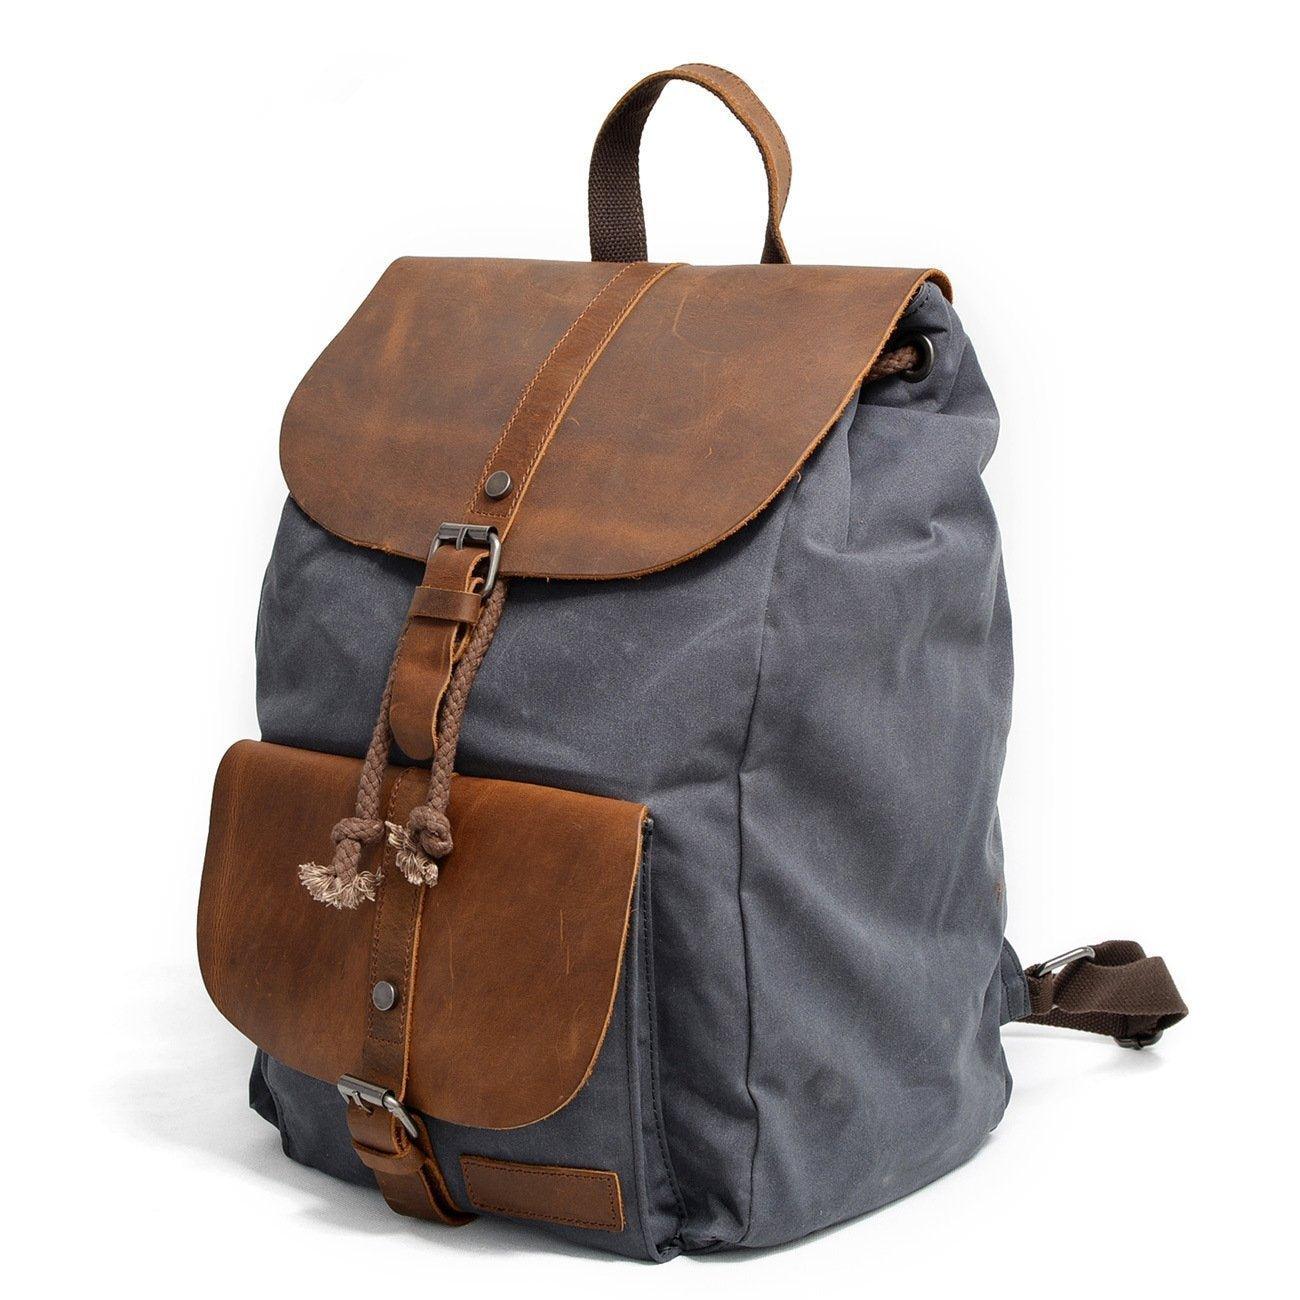 The Basic Canvas School Backpack